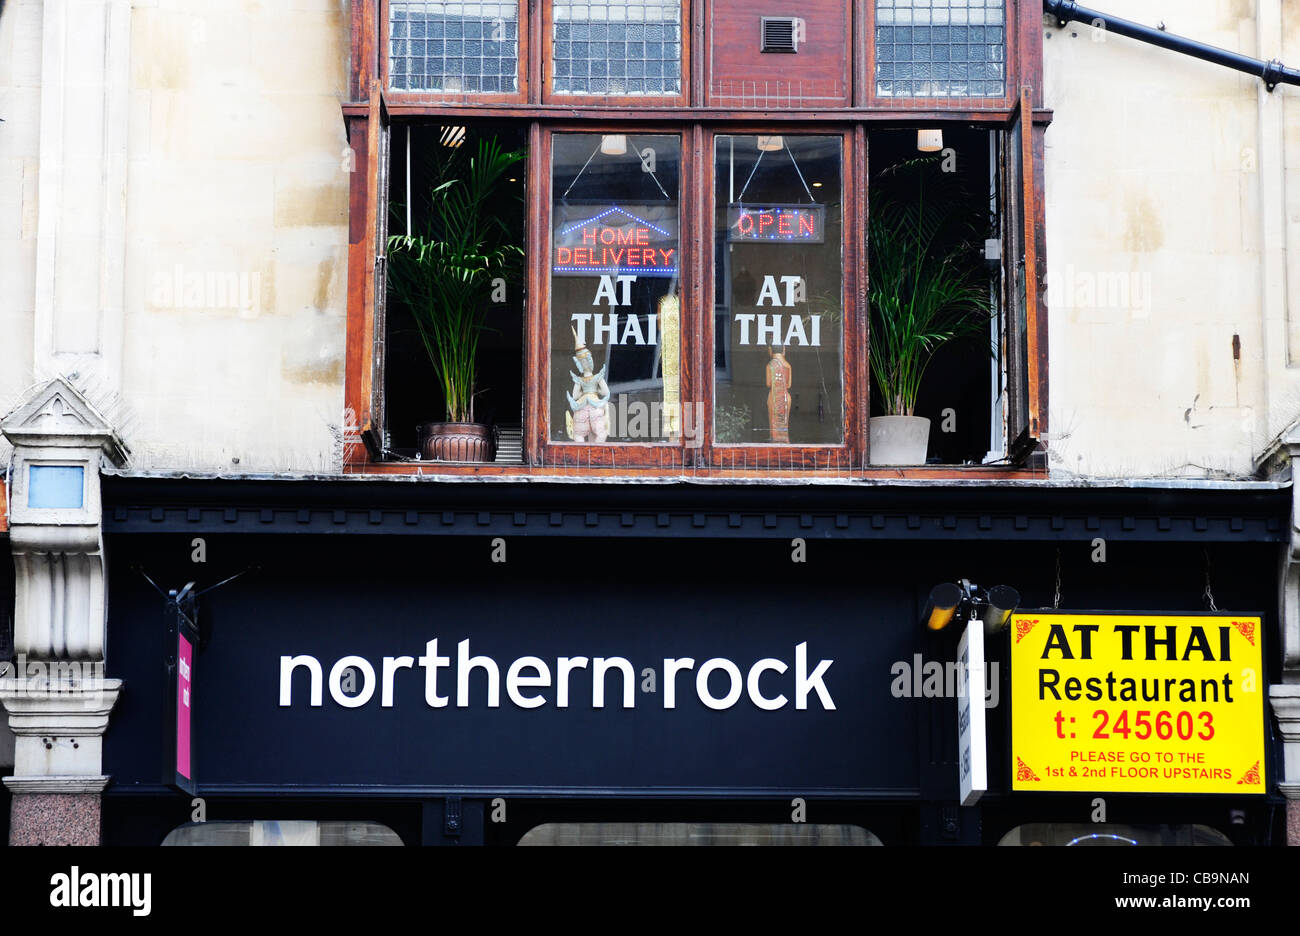 Northern Rock sign alongside a Thai restaurant sign in Oxford. UK. Stock Photo